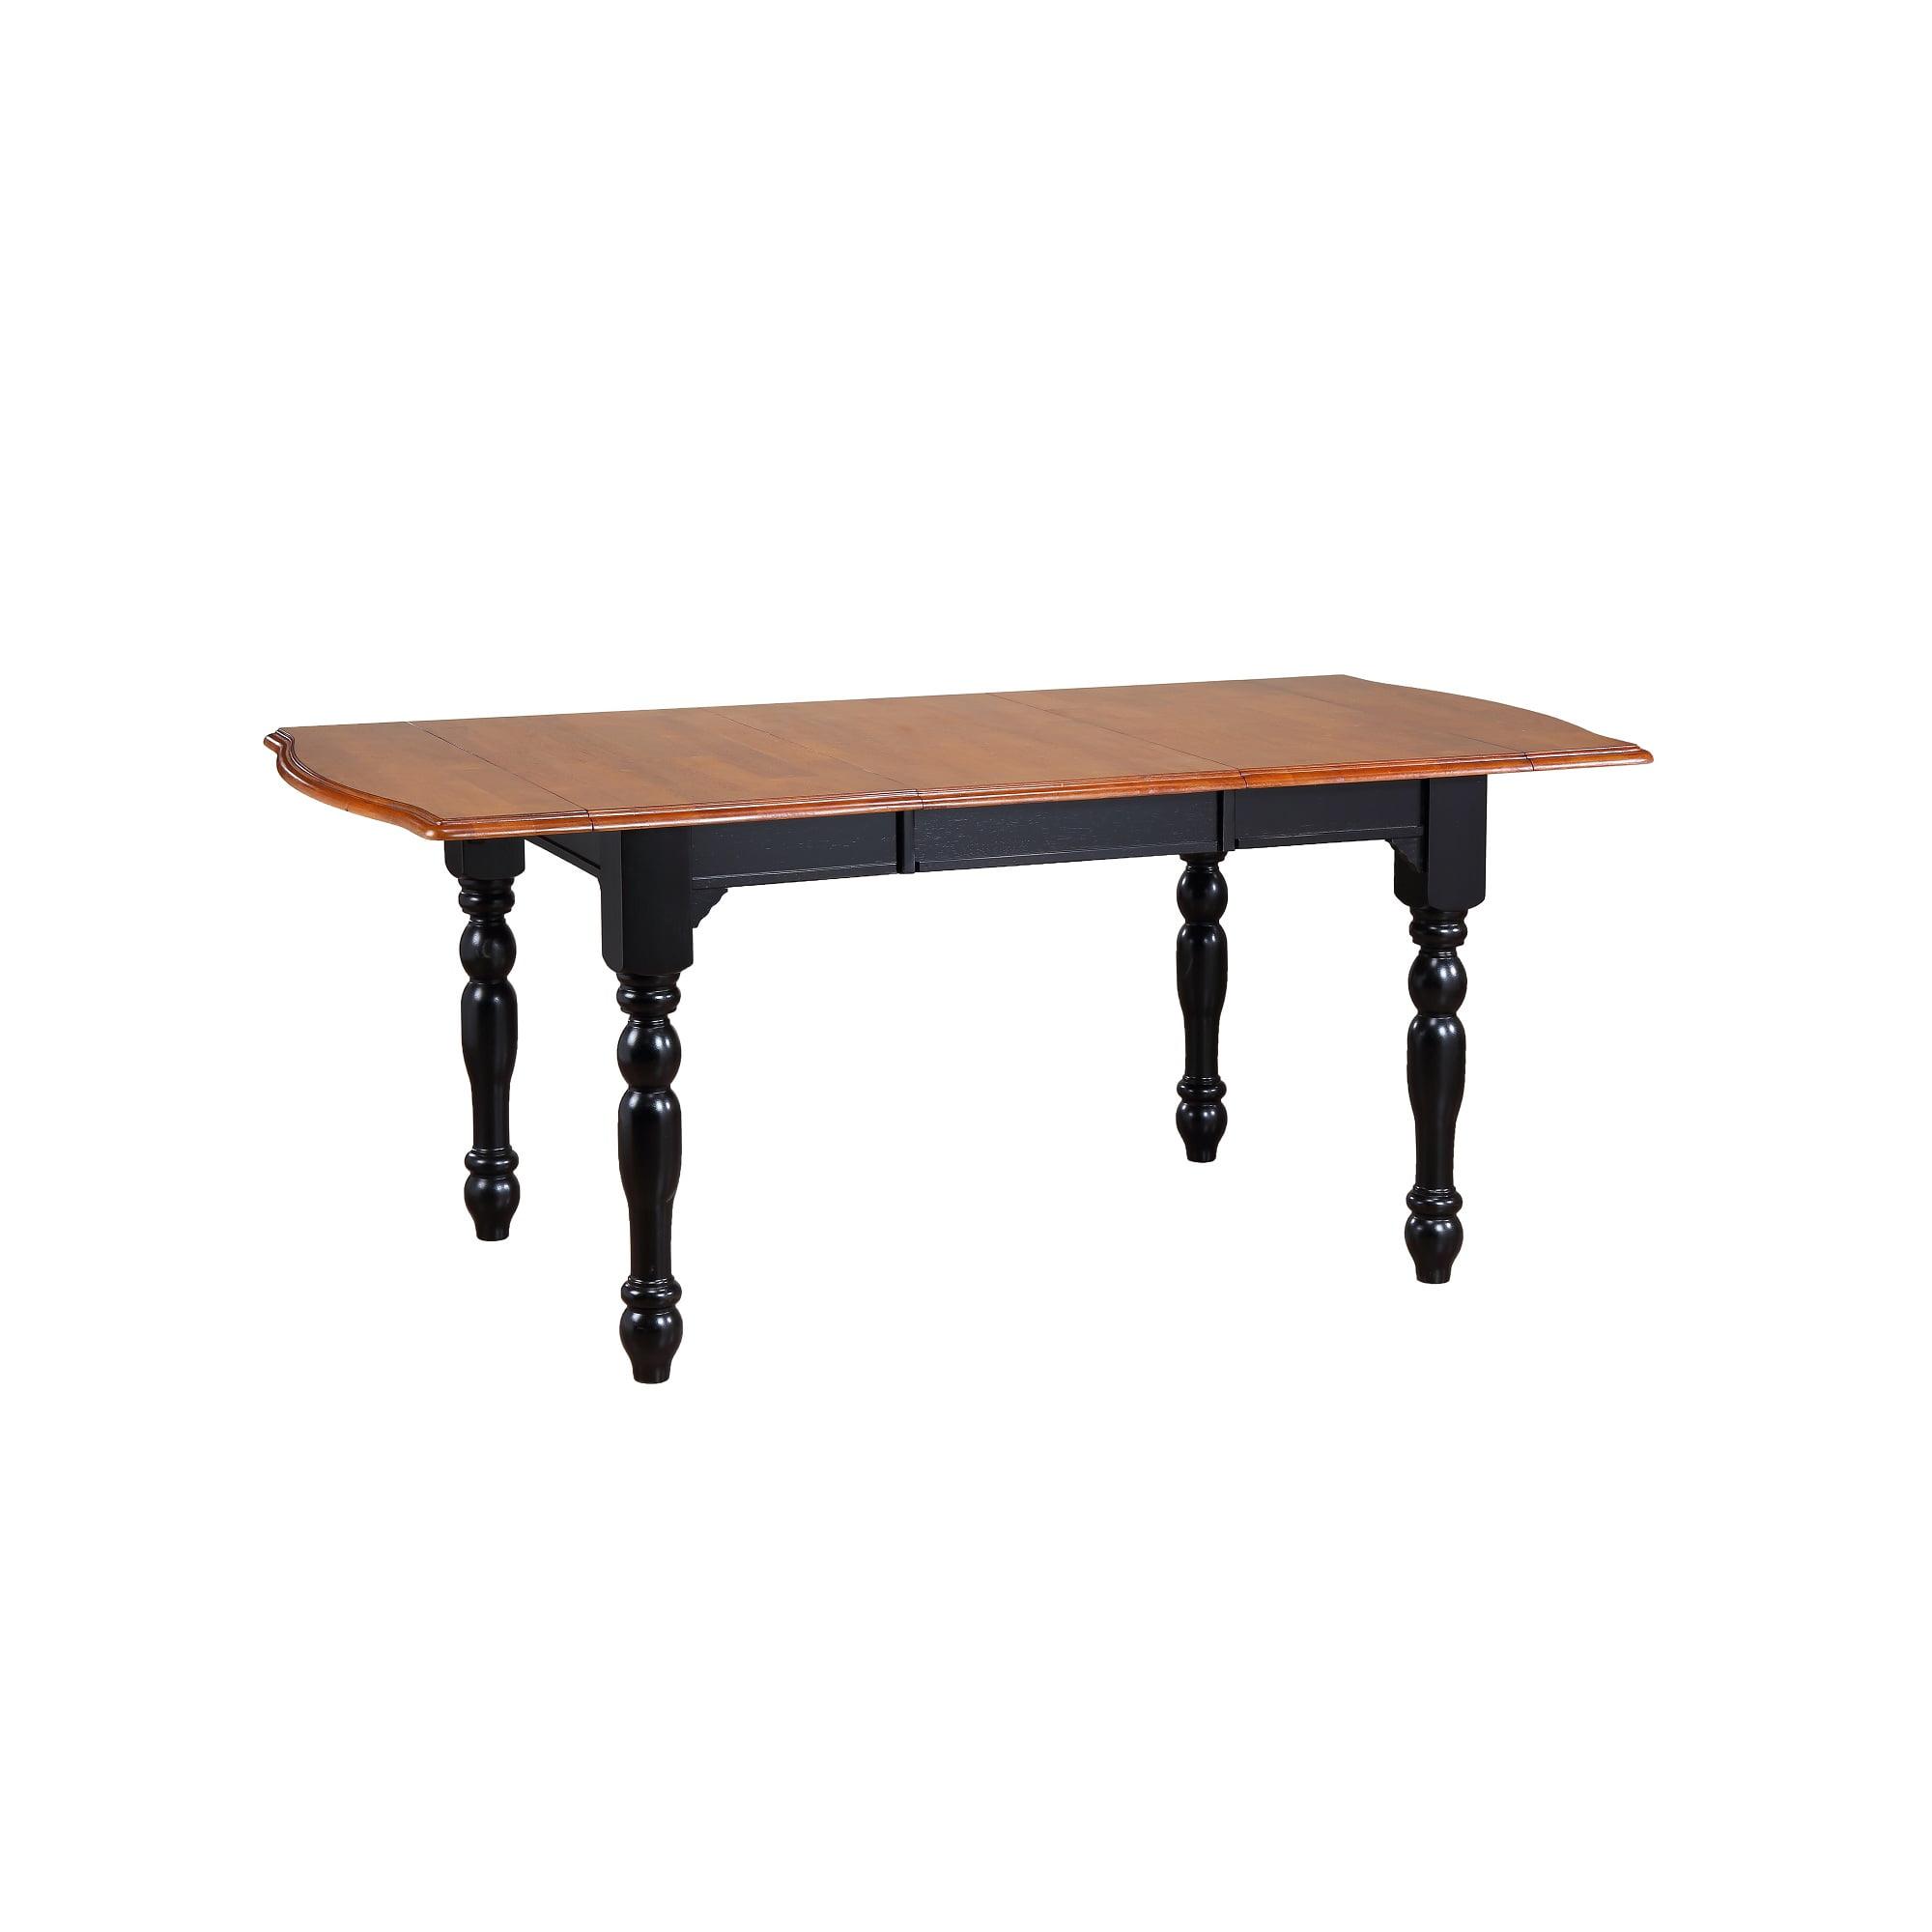 Antique Black & Cherry 72" Solid Wood Extendable Dining Table